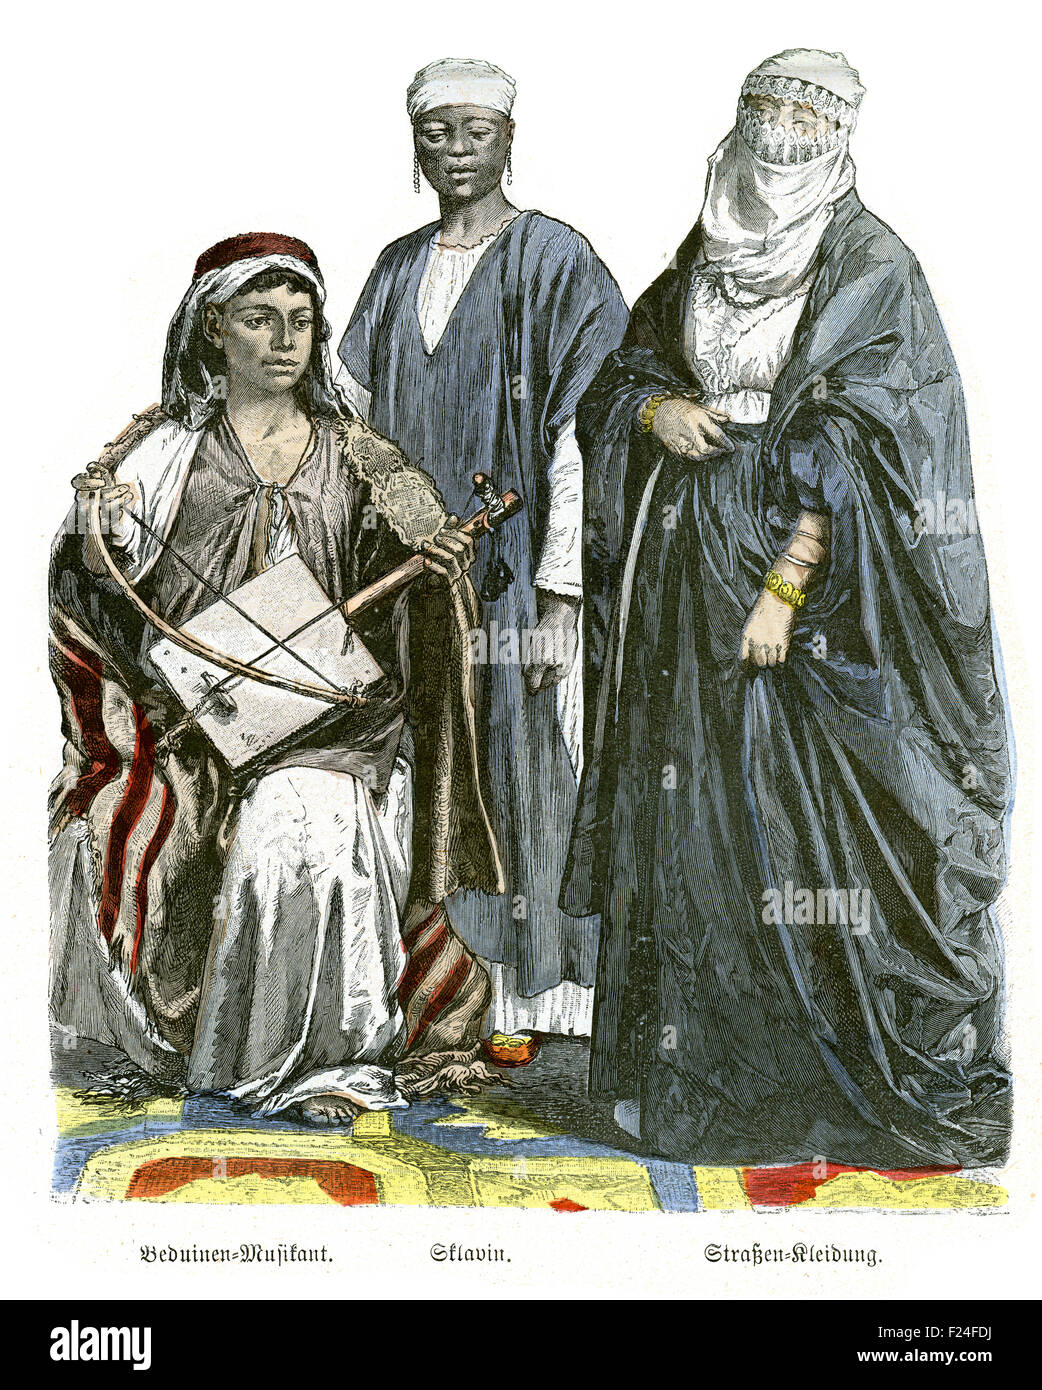 Period costumes of Egypt 19th Century, Bedouin musician, Slave and Woman in Street Garb. Stock Photo